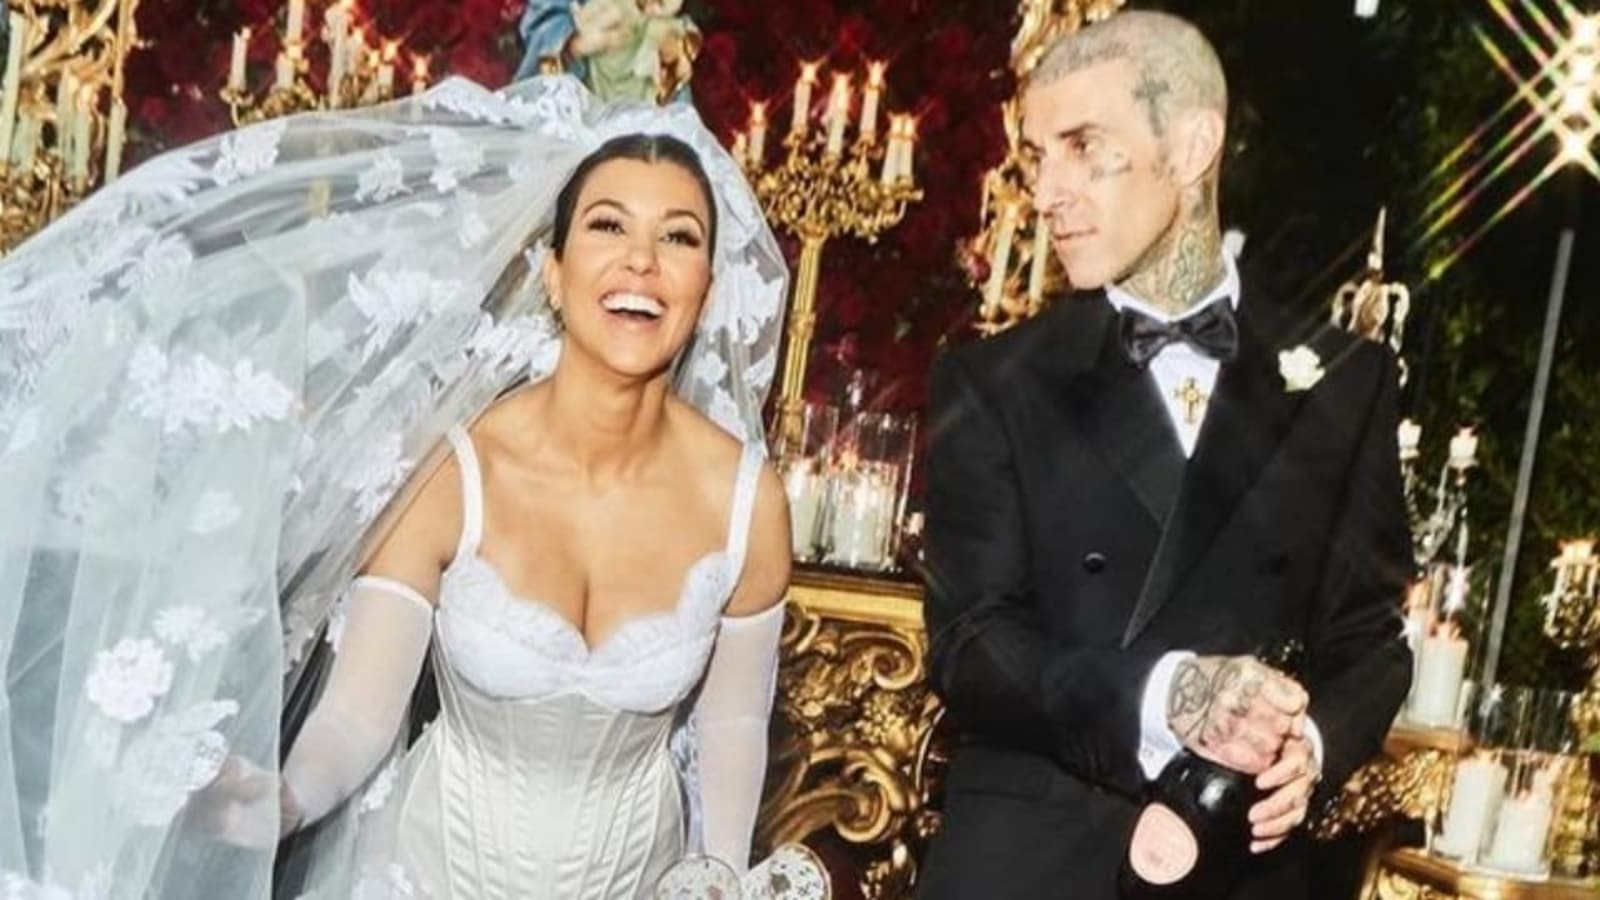 Check Out: Kourtney Kardashian Shares Glimpses From Her Wedding Dress  Fitting In Milan With A Heartfelt